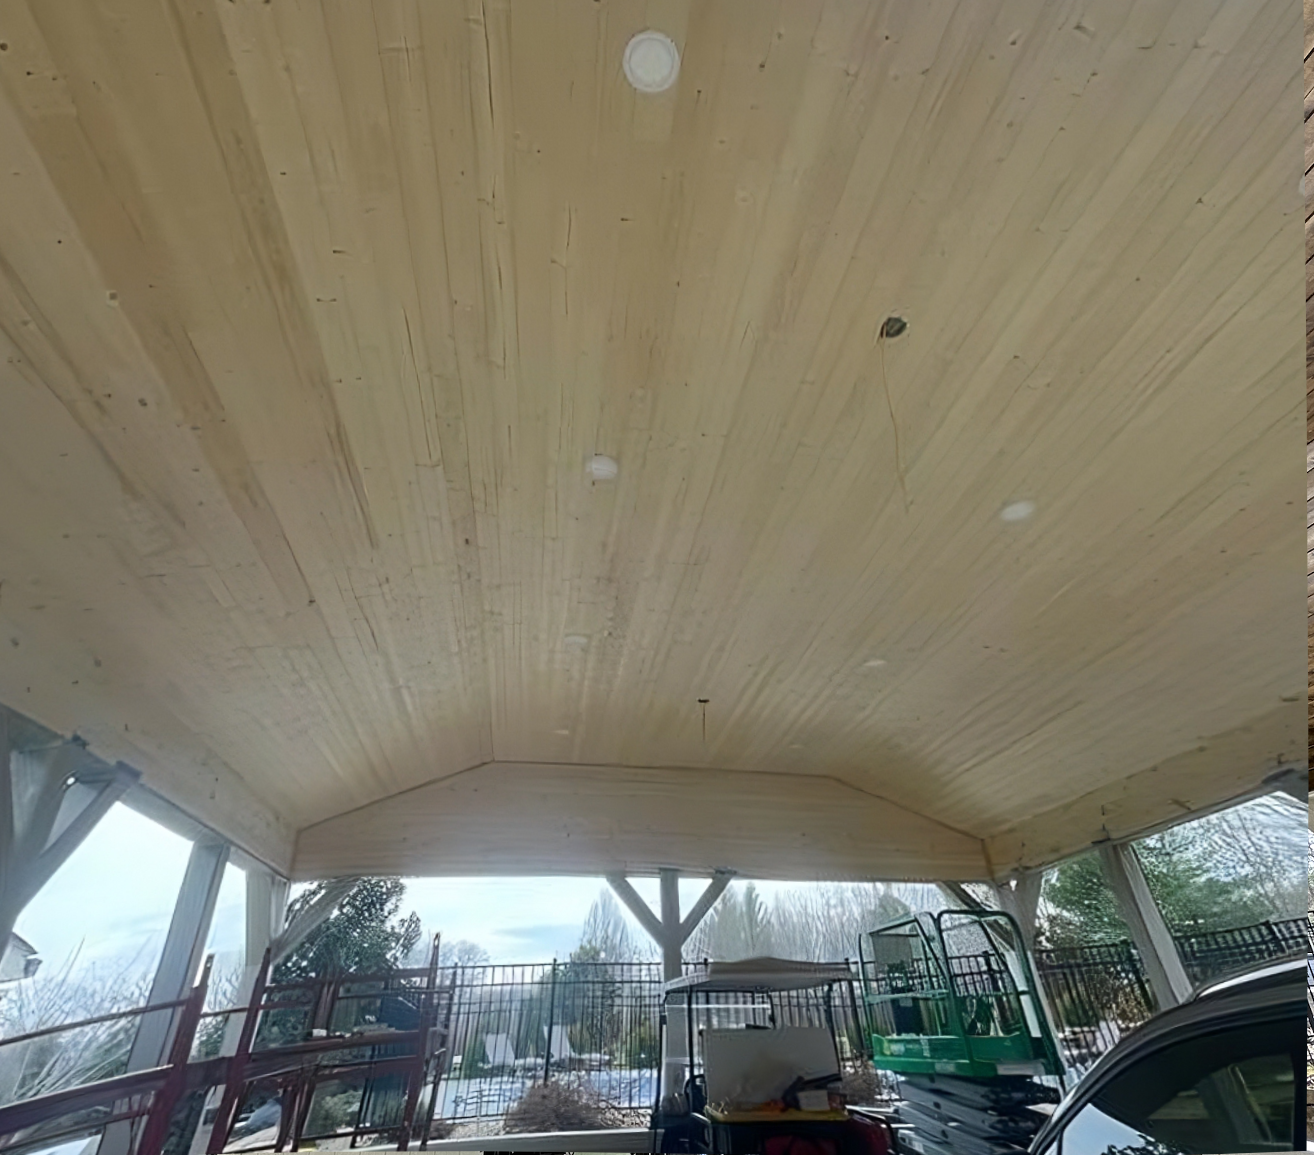 Wood Staining For Car-Port Ceiling Before